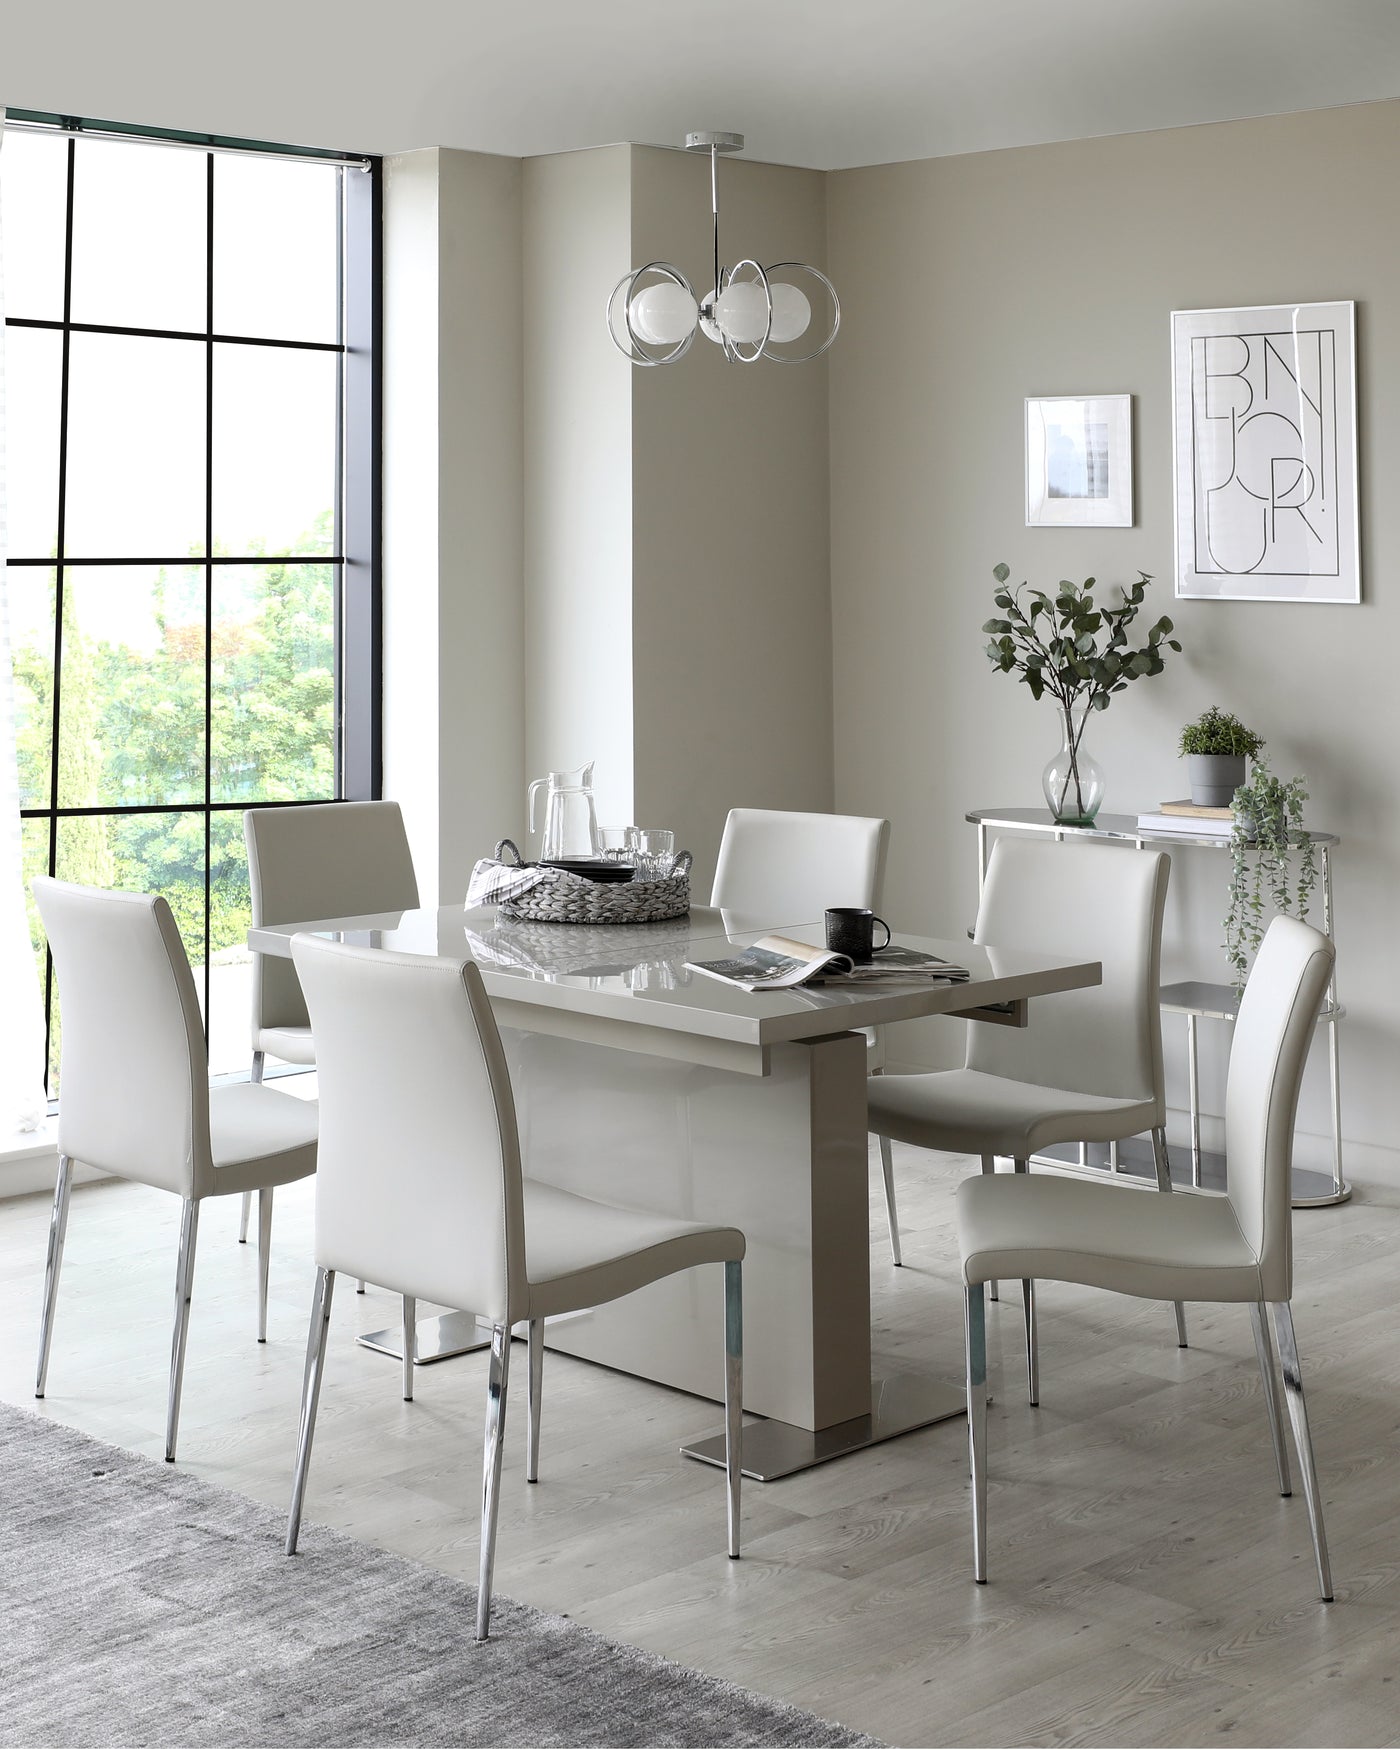 Modern dining room set featuring a sleek rectangular table with a reflective taupe base and a glass top, surrounded by six white upholstered chairs with chrome legs. A cosy yet sophisticated ensemble for contemporary interiors.